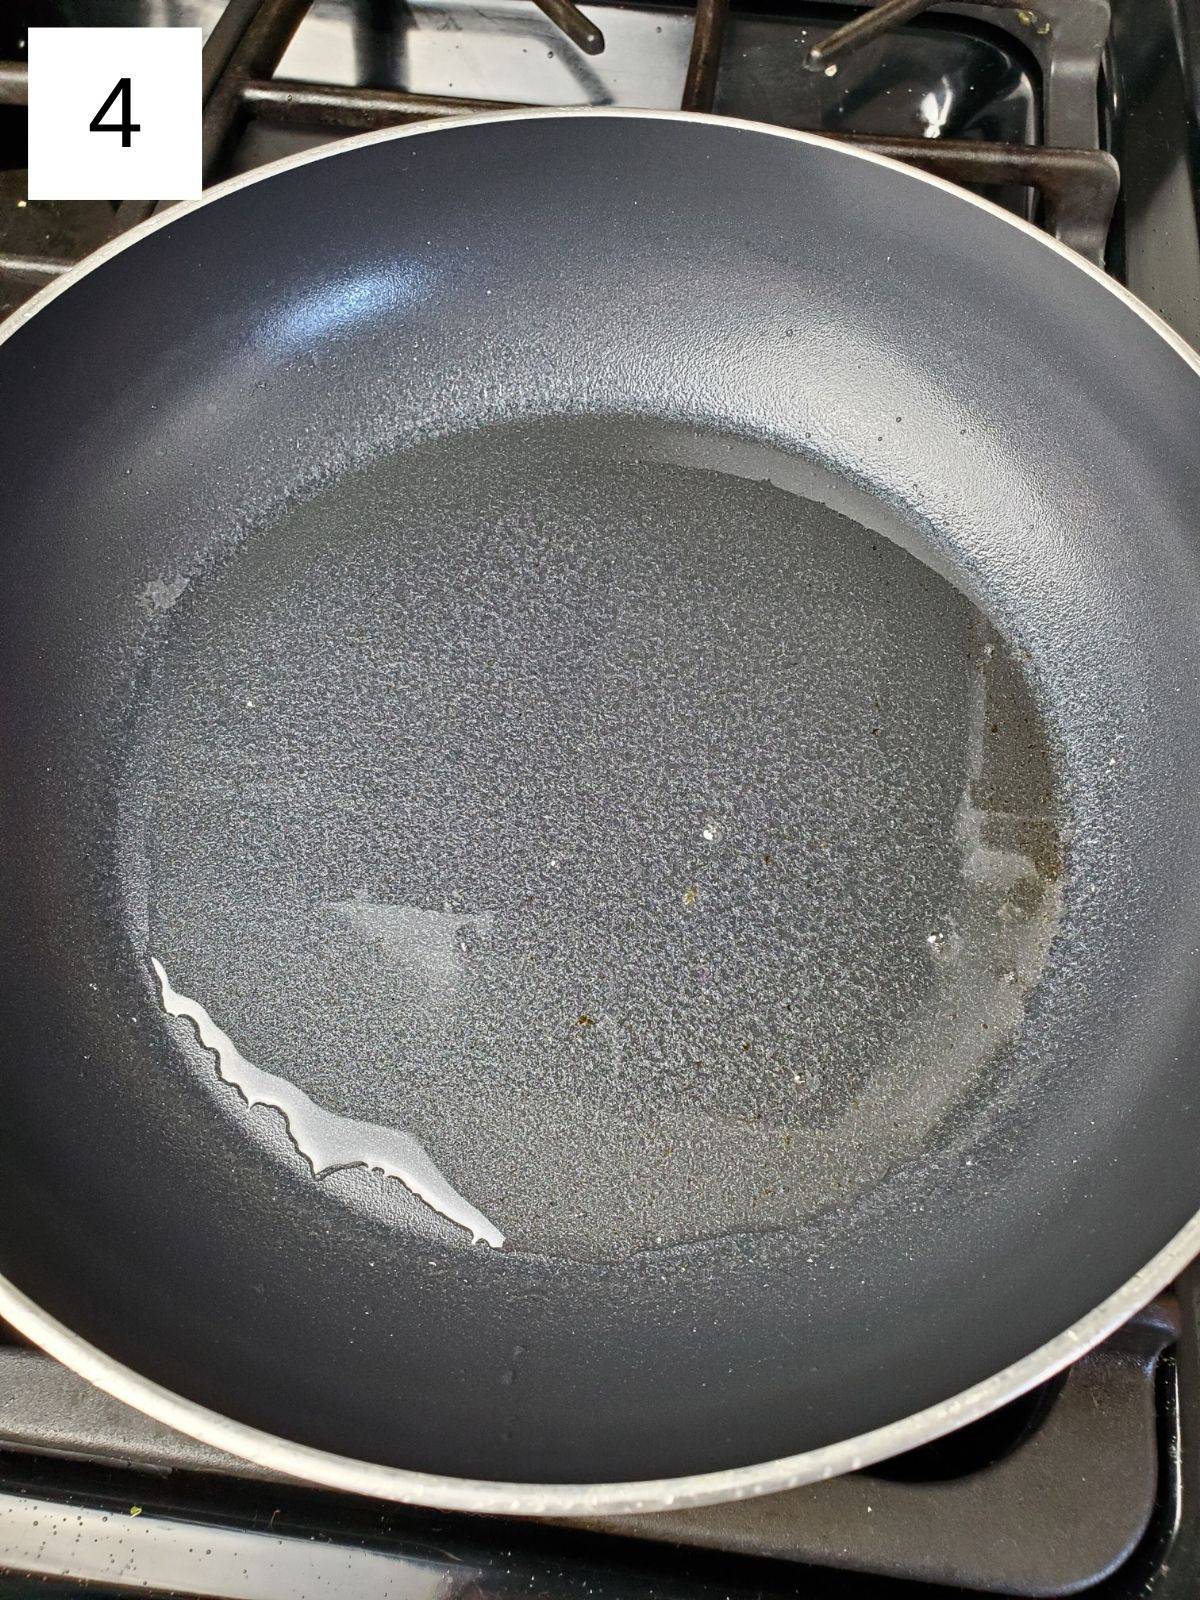 oil-coated pan on a stove.